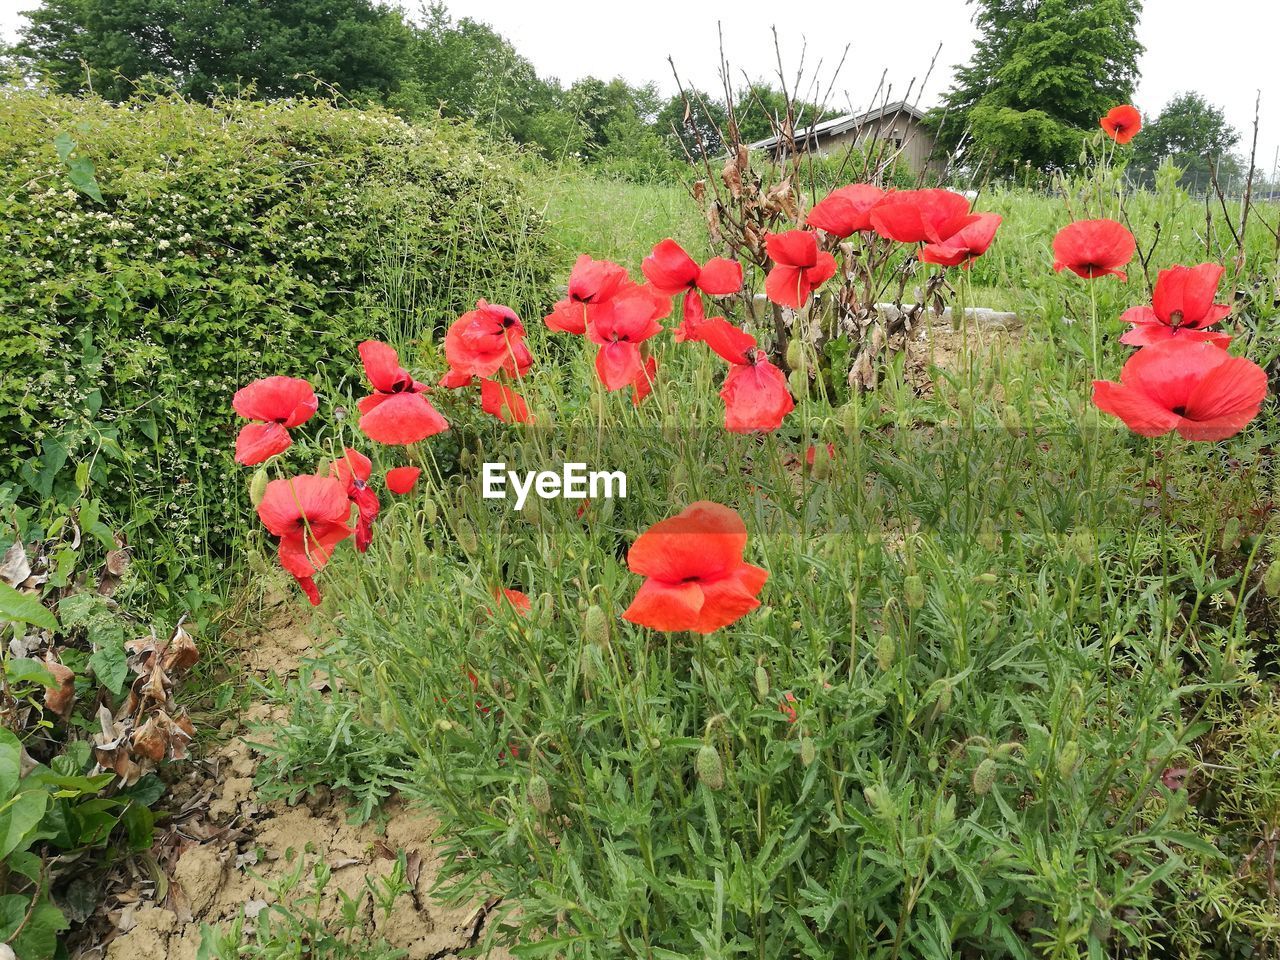 RED POPPIES BLOOMING ON FIELD